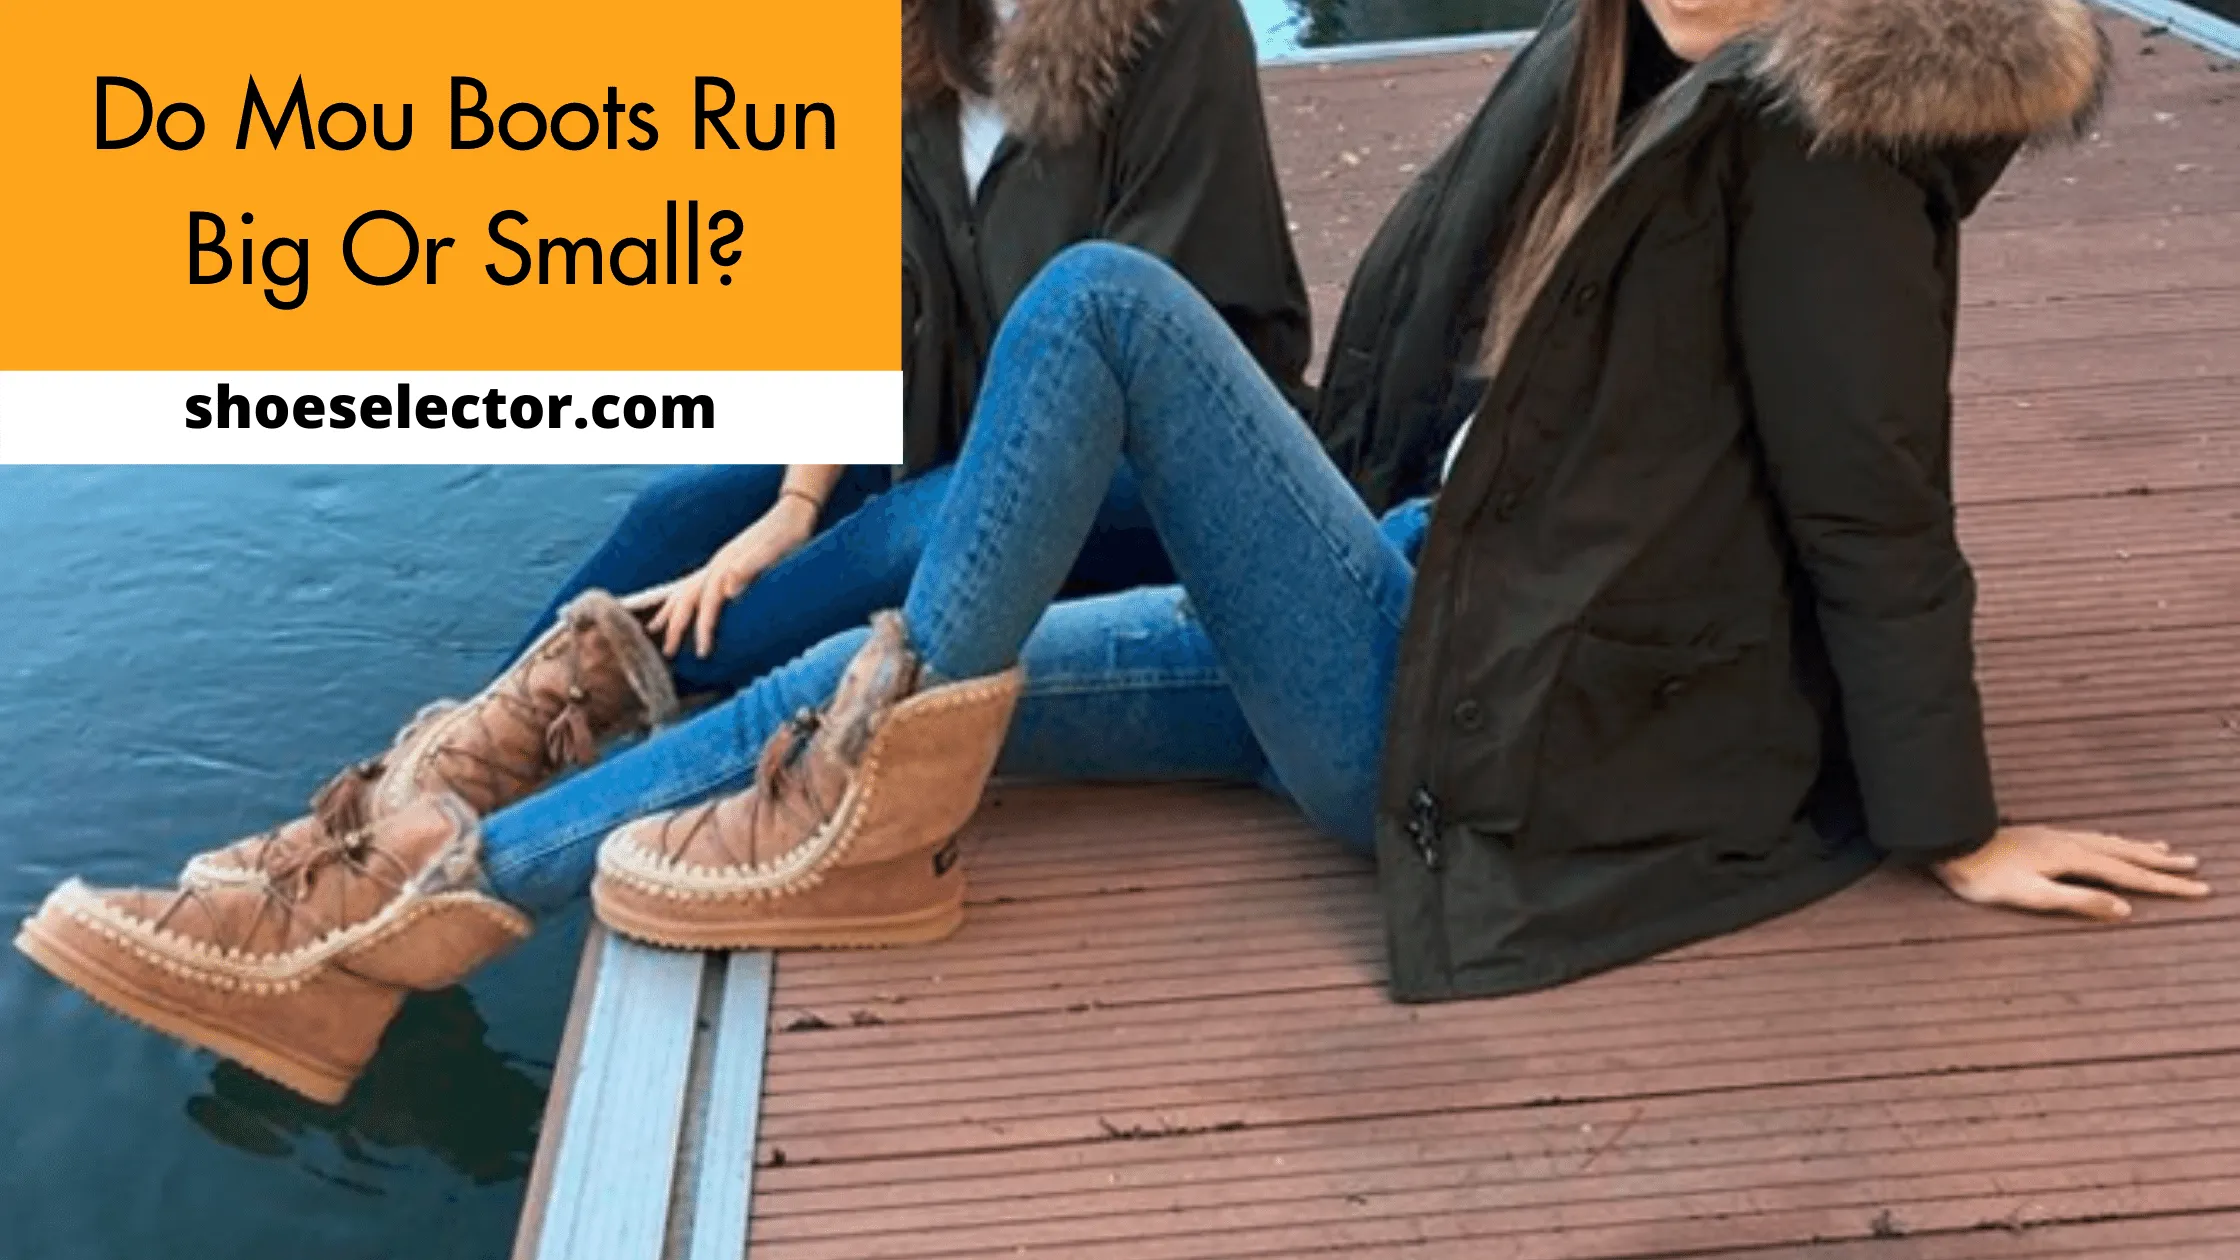 Do Mou Boots Run Big or Small? - Quick Guide